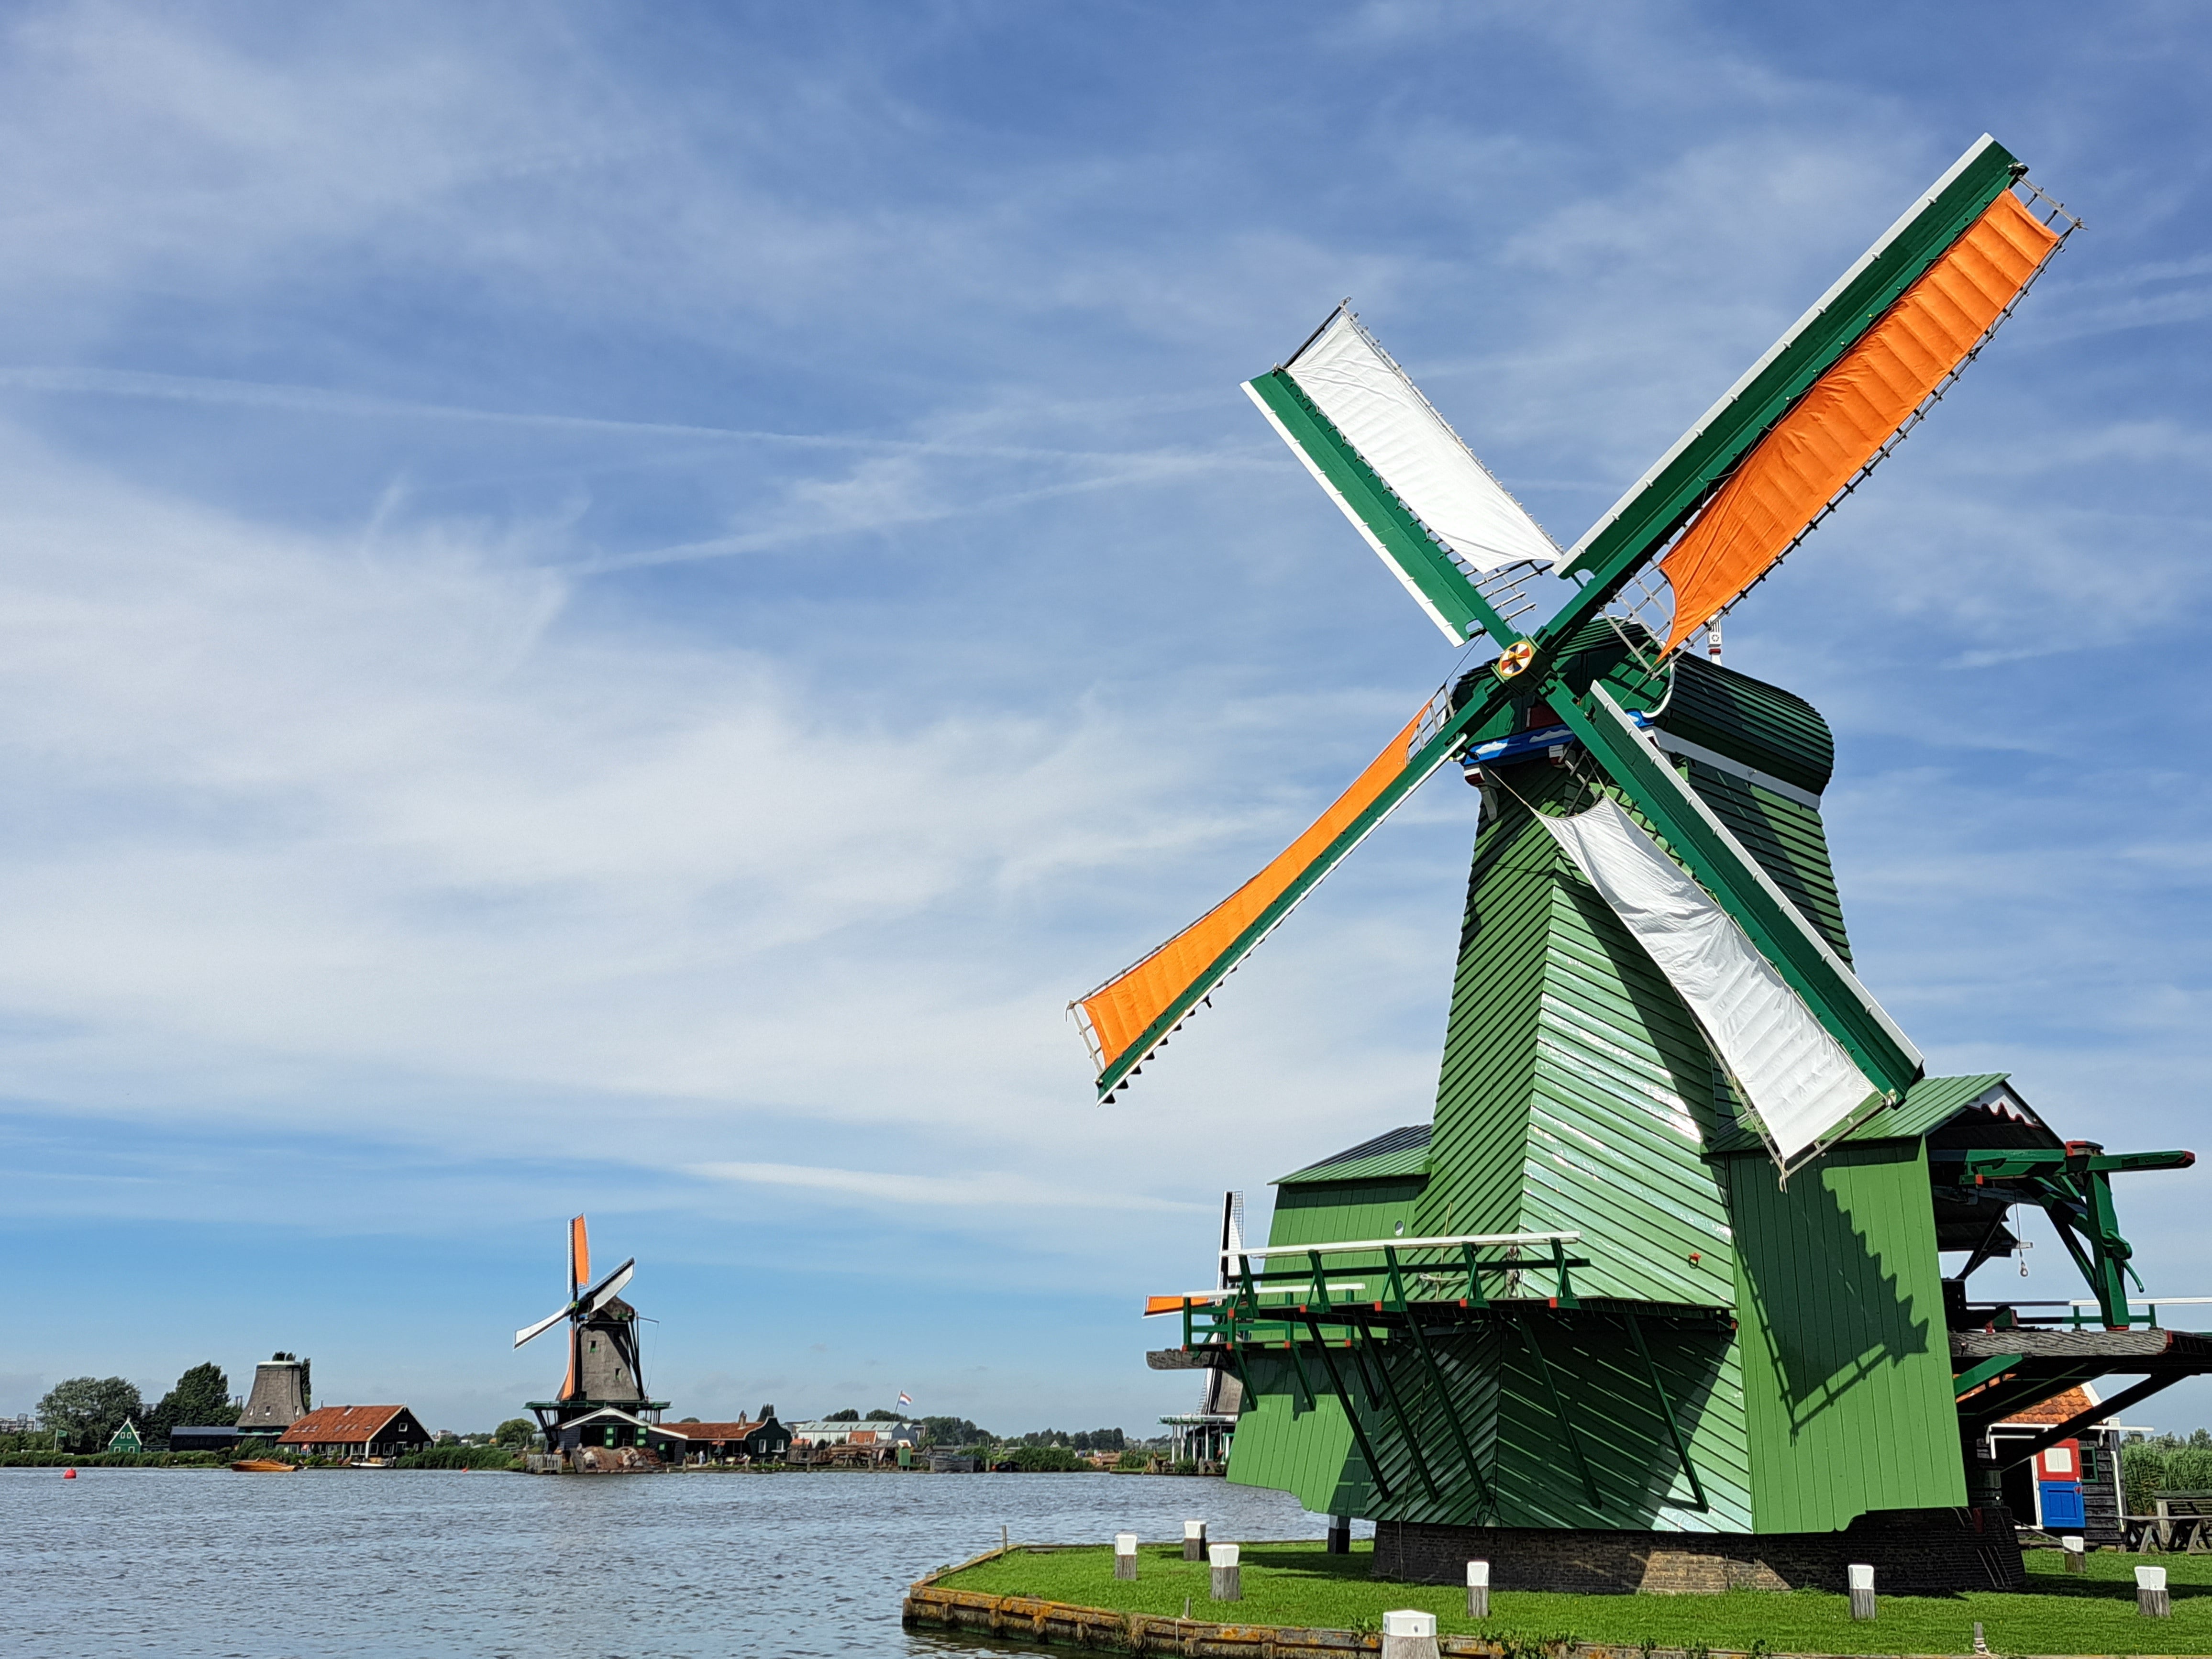 Check out the windmills at Zaanse Schans